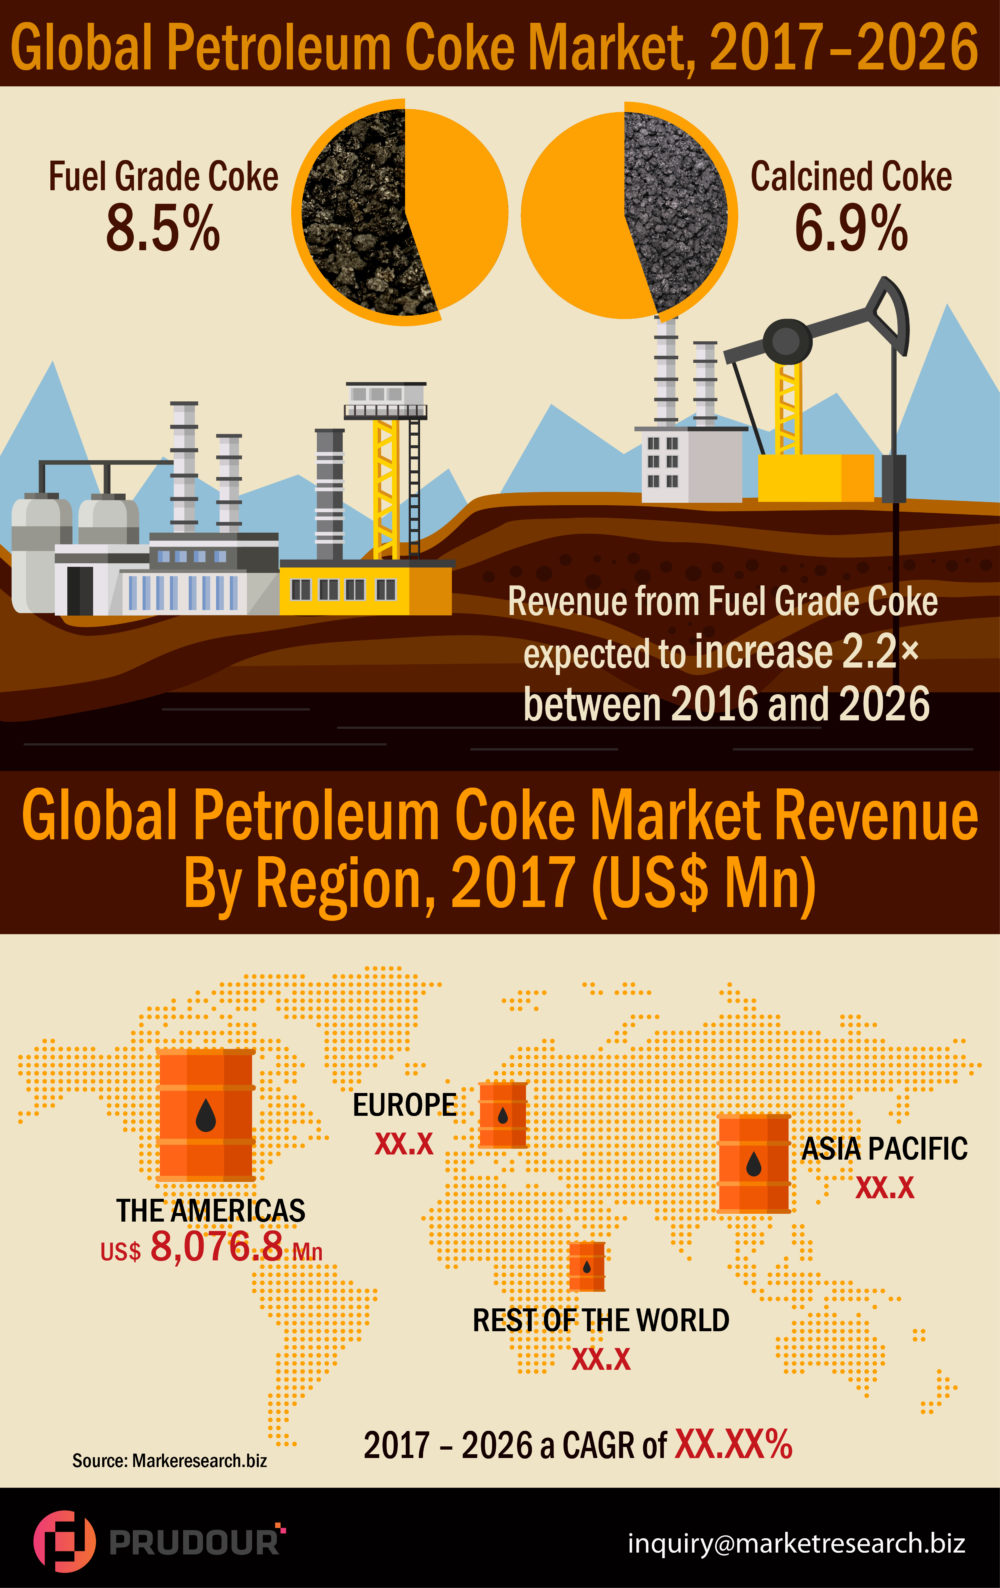 Global Petroleum Coke Market Growth CAGR of 8.1% from 2017 to 2026